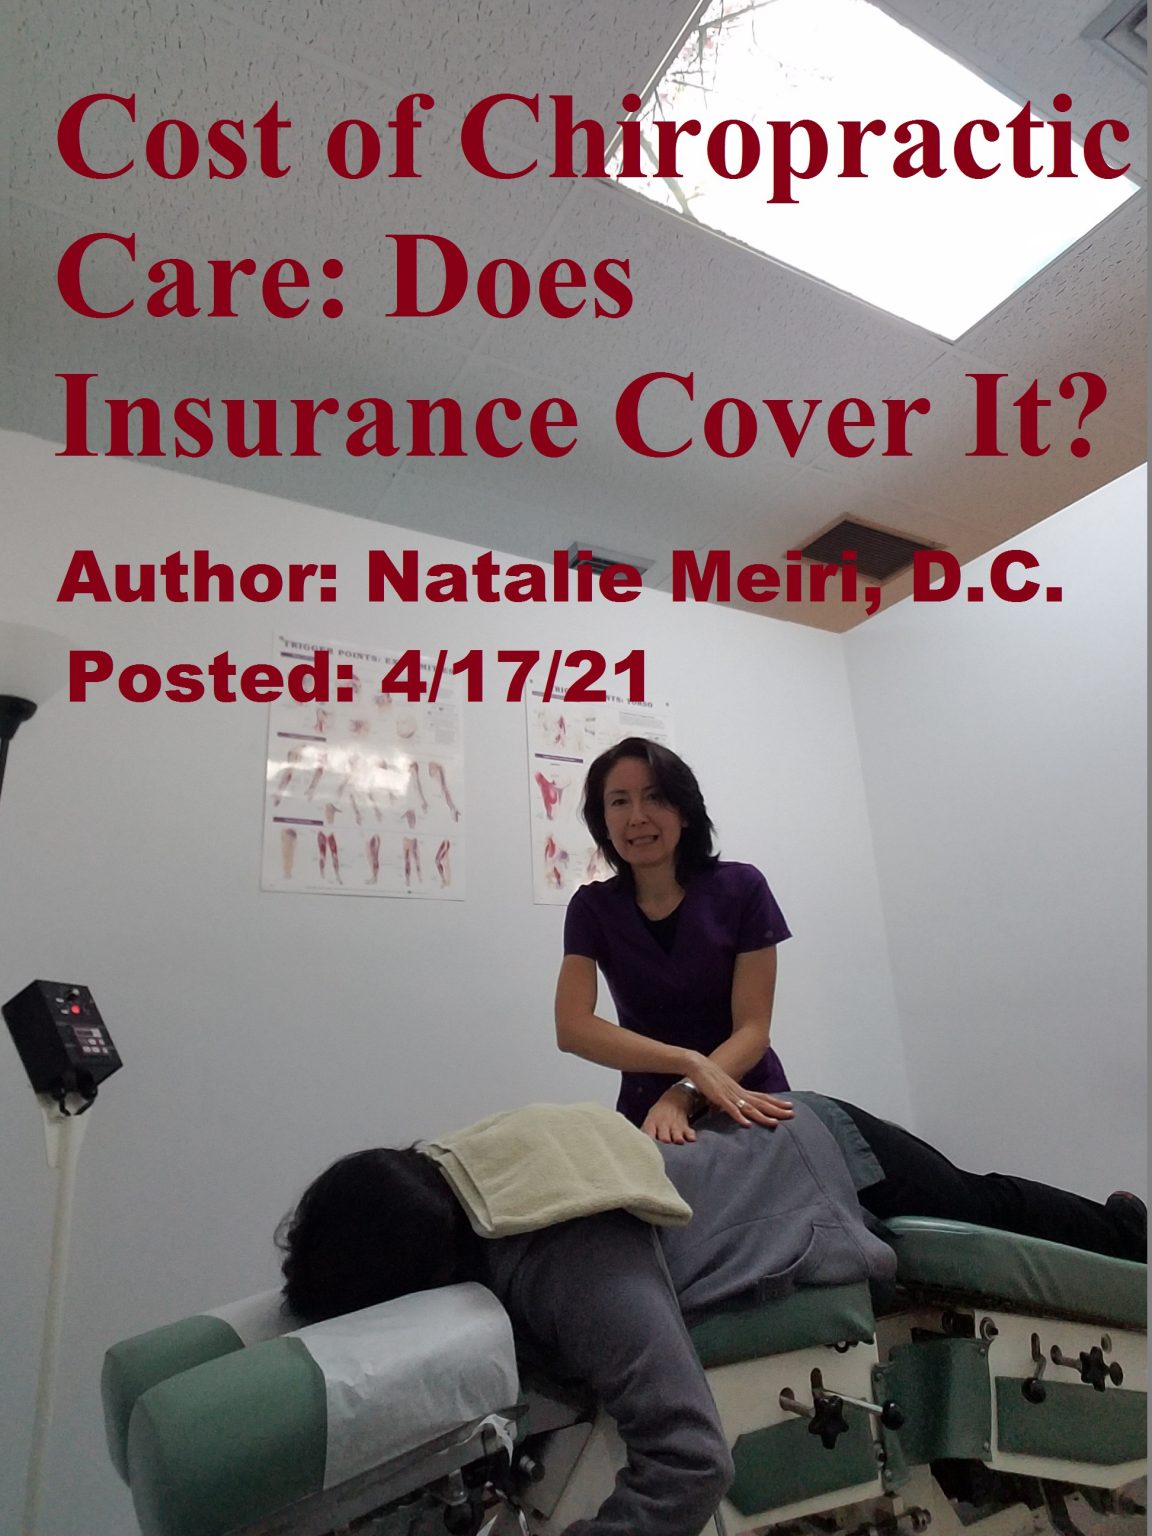 cost-of-chiropractic-care-does-insurance-cover-it